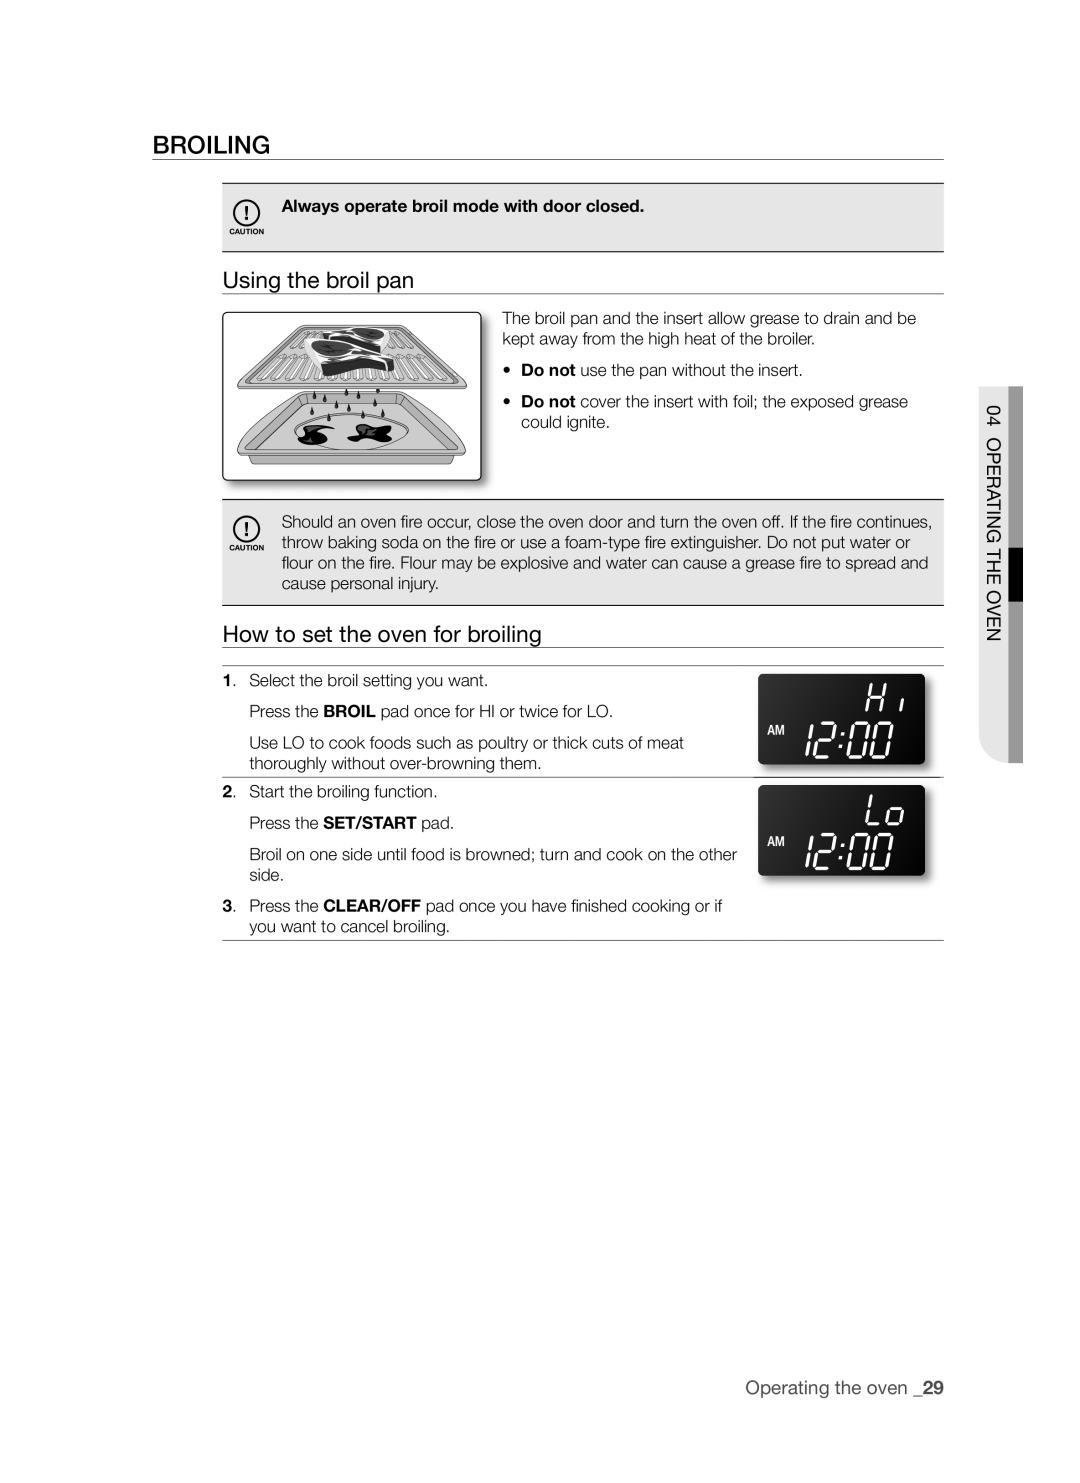 Samsung FTQ352IWB, FTQ352IWW user manual Broiling, Using the broil pan, How to set the oven for broiling, Operating The Oven 